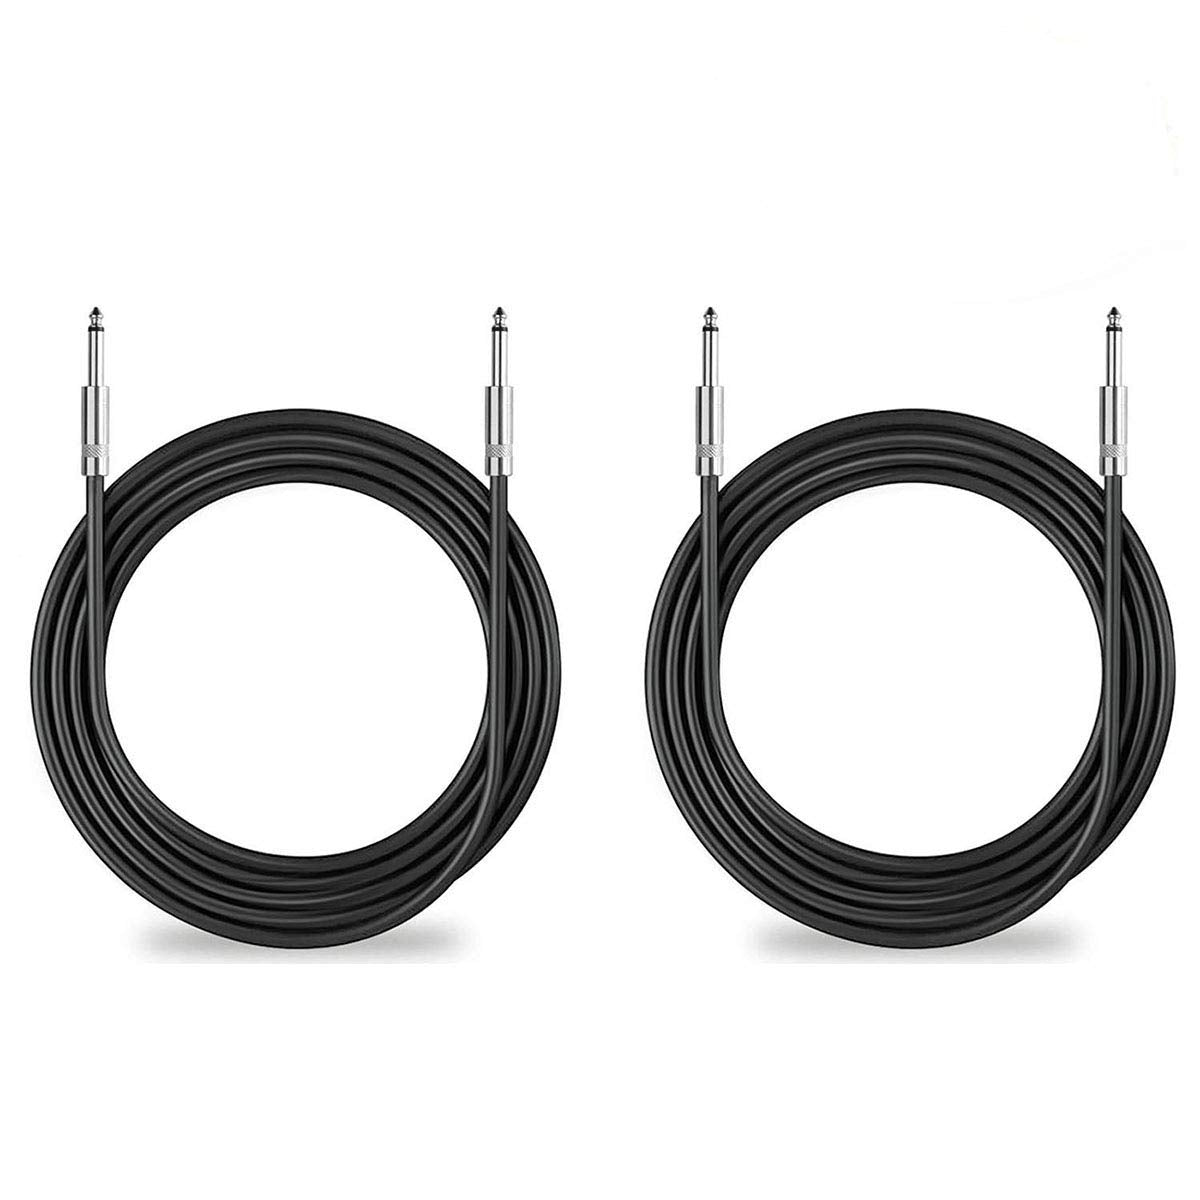 2 Pack PRO Audio 12 Gauge 1/4 to 1/4 mono PA DJ speaker cable wire 12 Feet